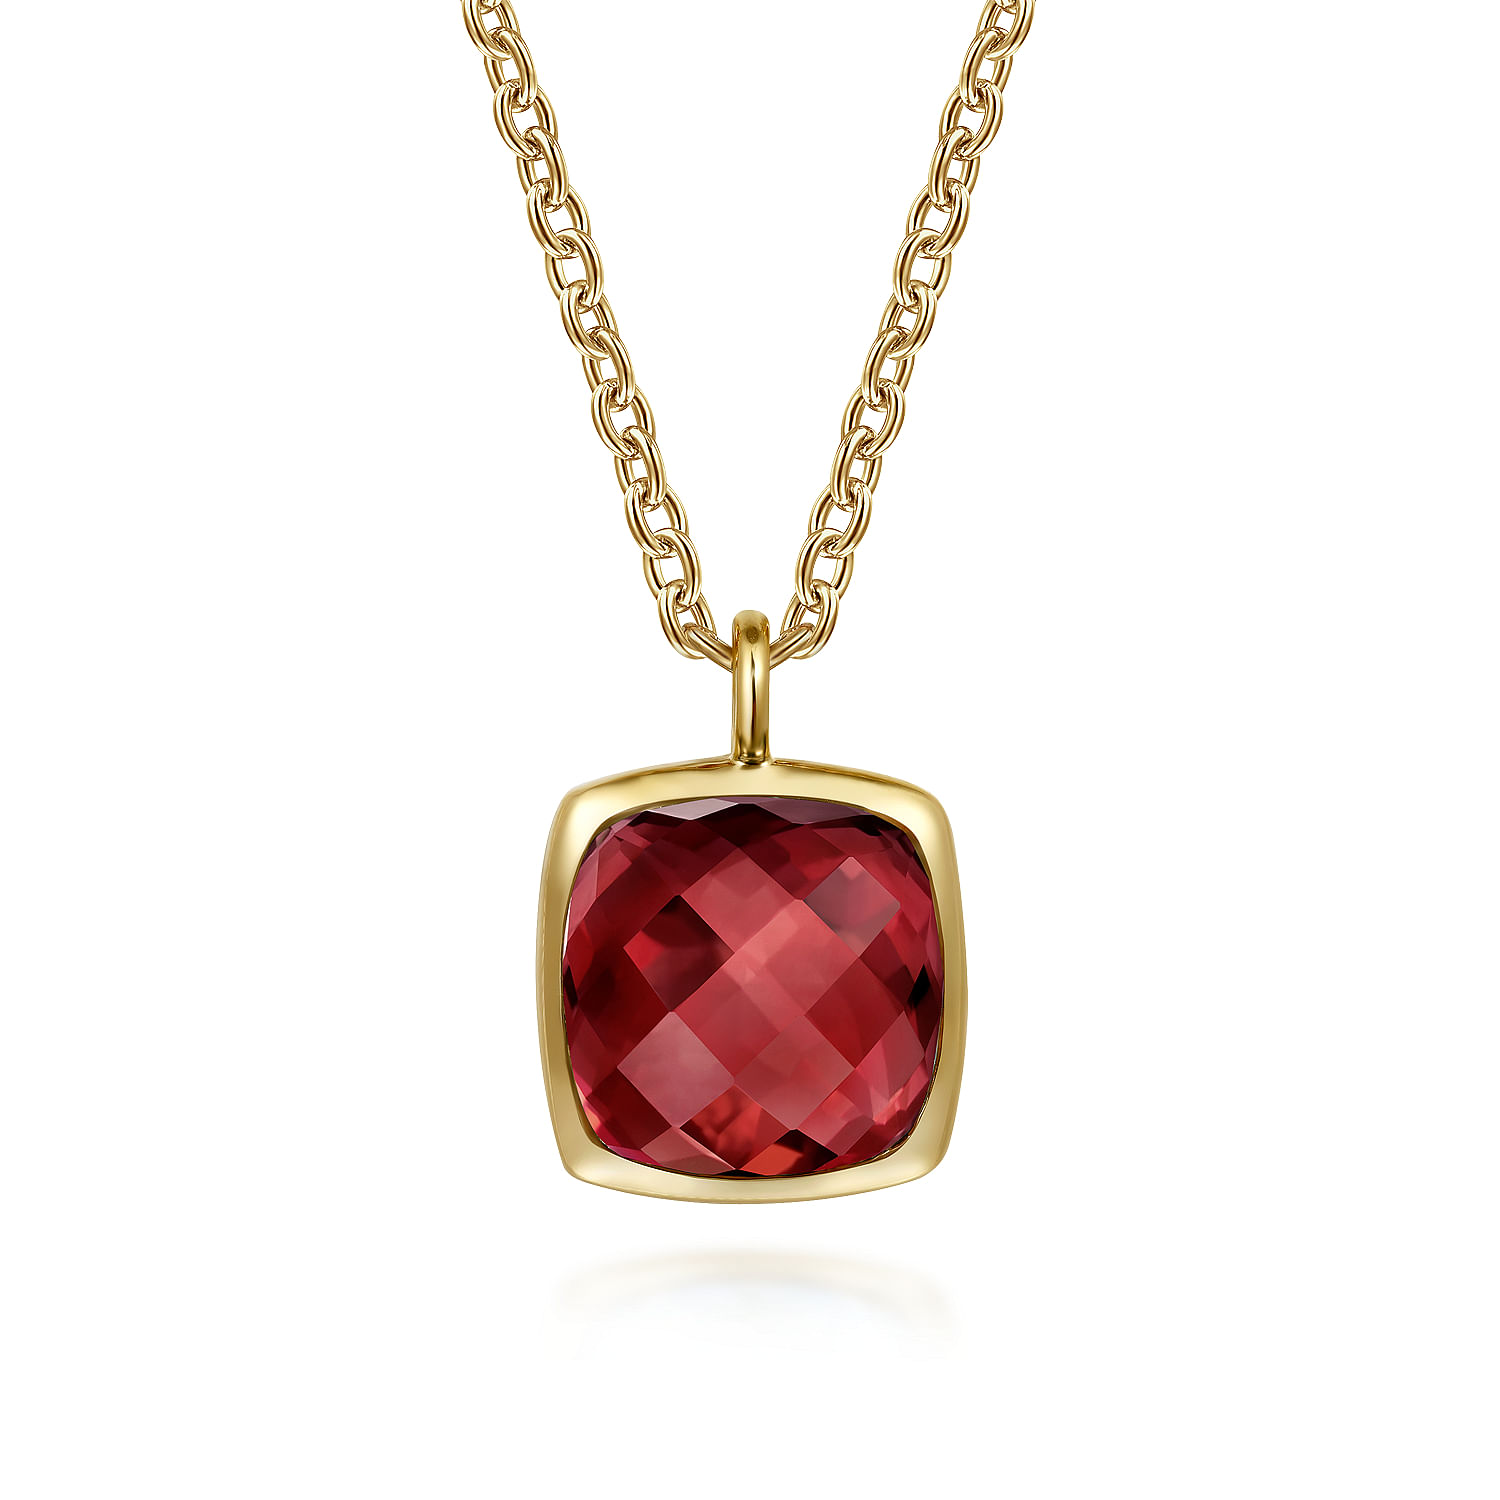 14K Yellow Gold Cushion Cut Garnet Necklace With Flower Pattern J-Back and Bezel Setting